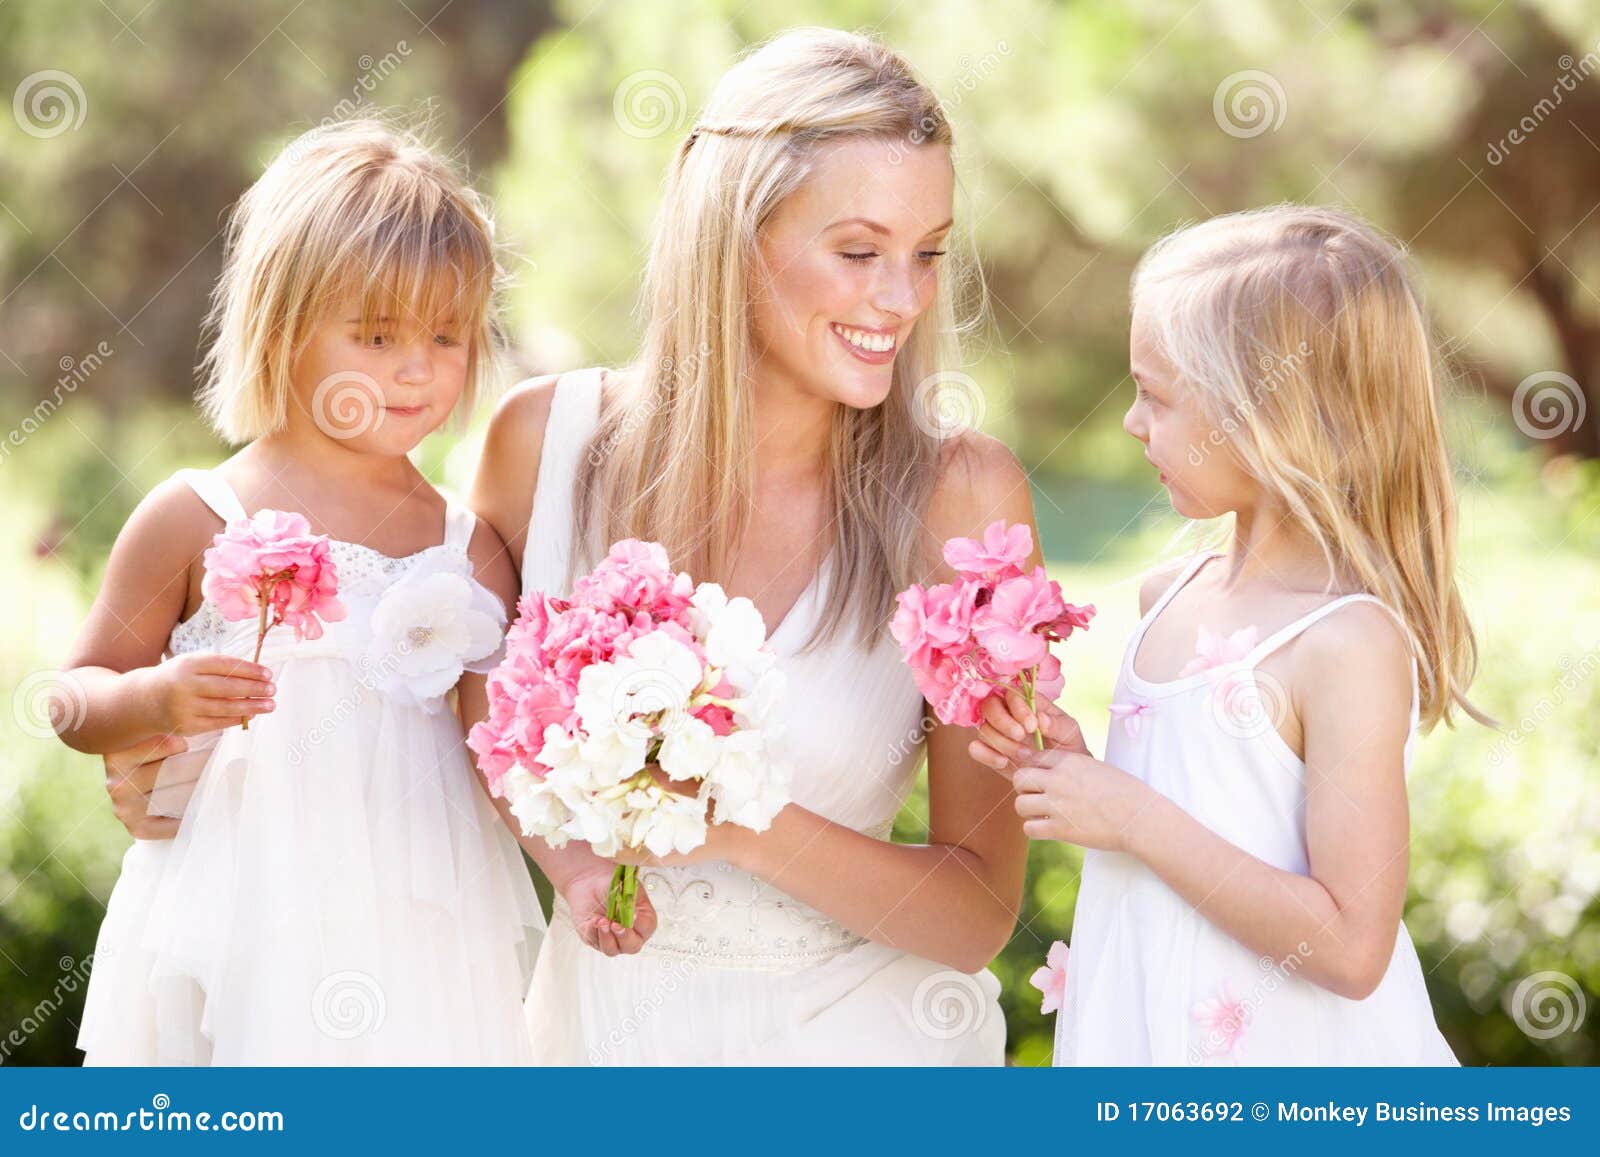 bride with bridesmaids outdoors at wedding